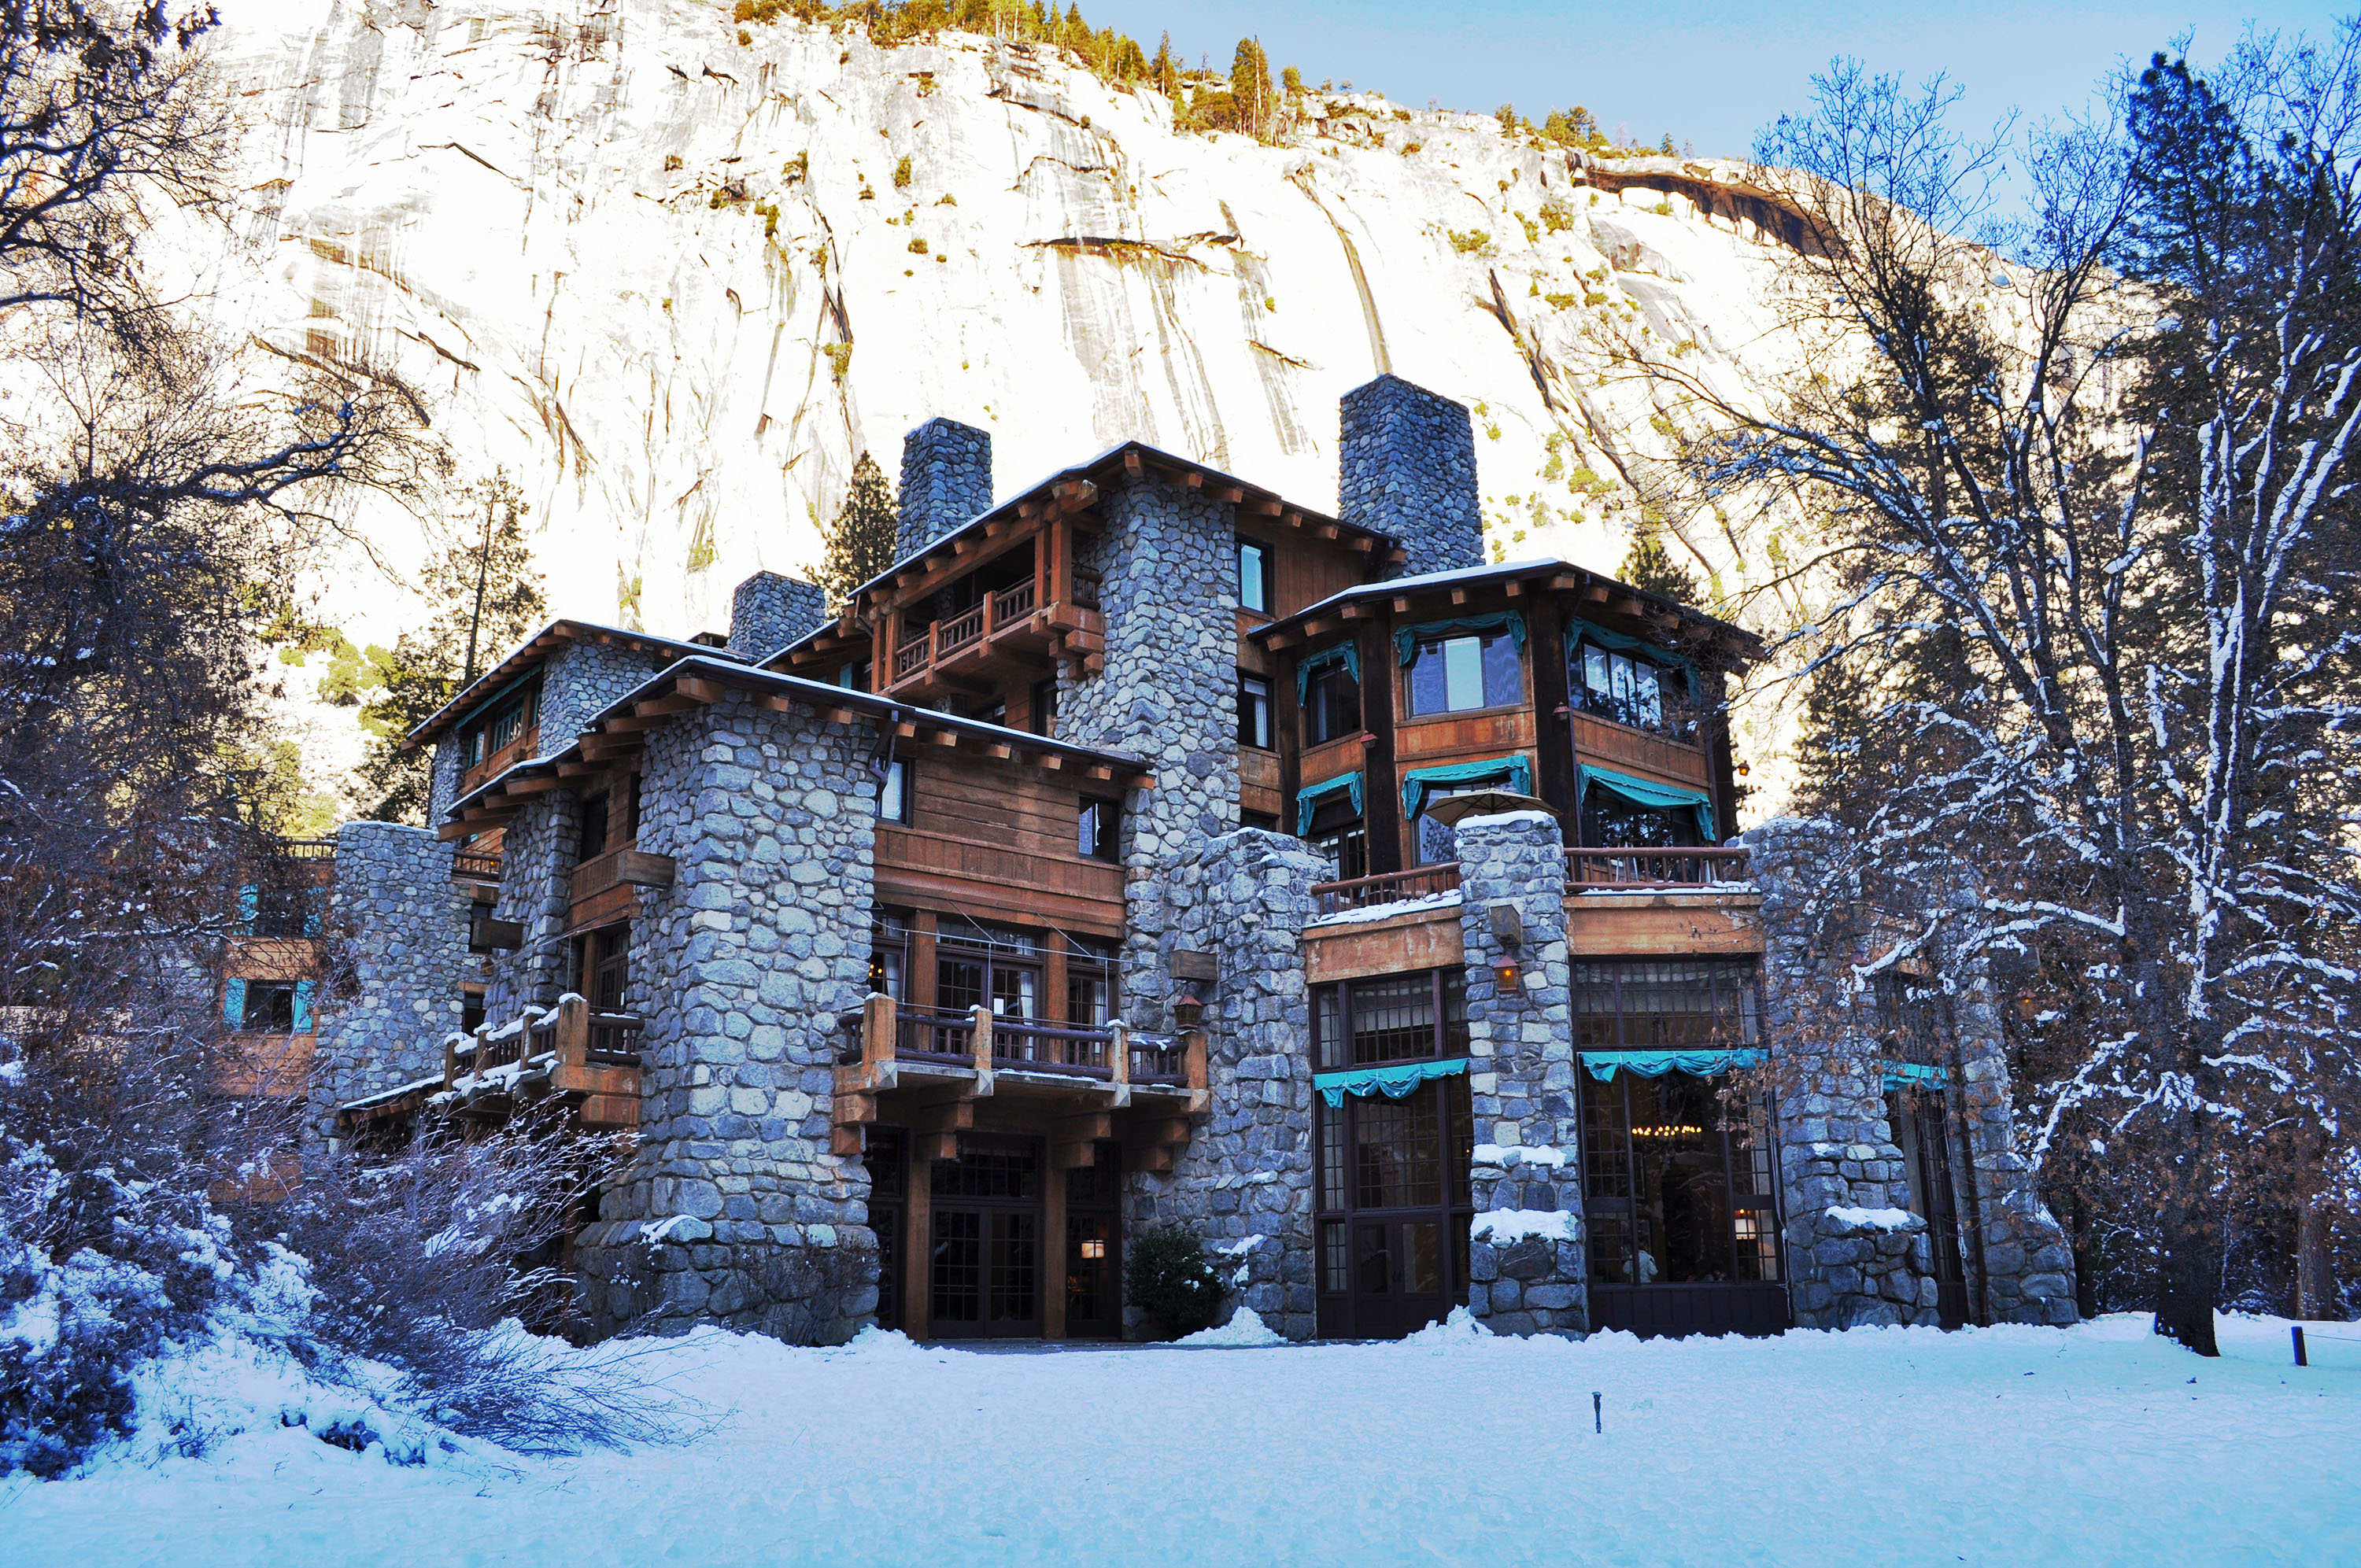 Ahwahnee Hotel, Yosemite Valley – Architecture Revived